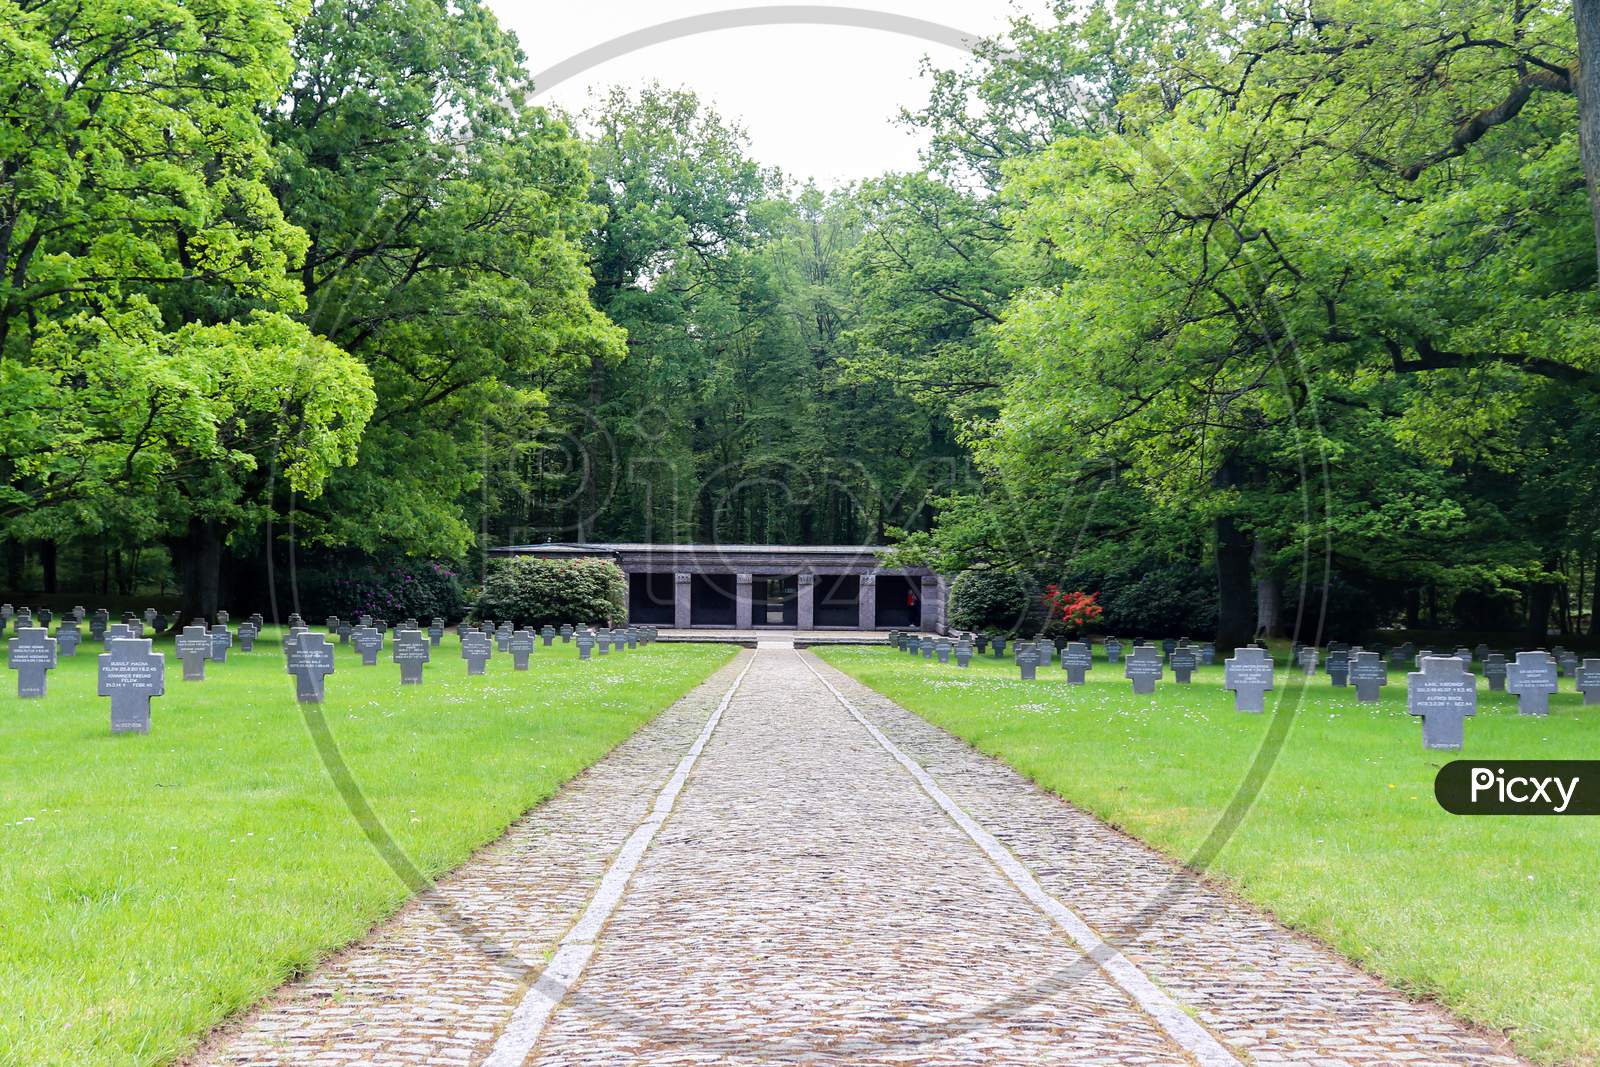 Sandweiler, Luxembourg - May 26, 2019: Path leading to the entrance at the Sandweiler German War Cemetery with graves on either side.